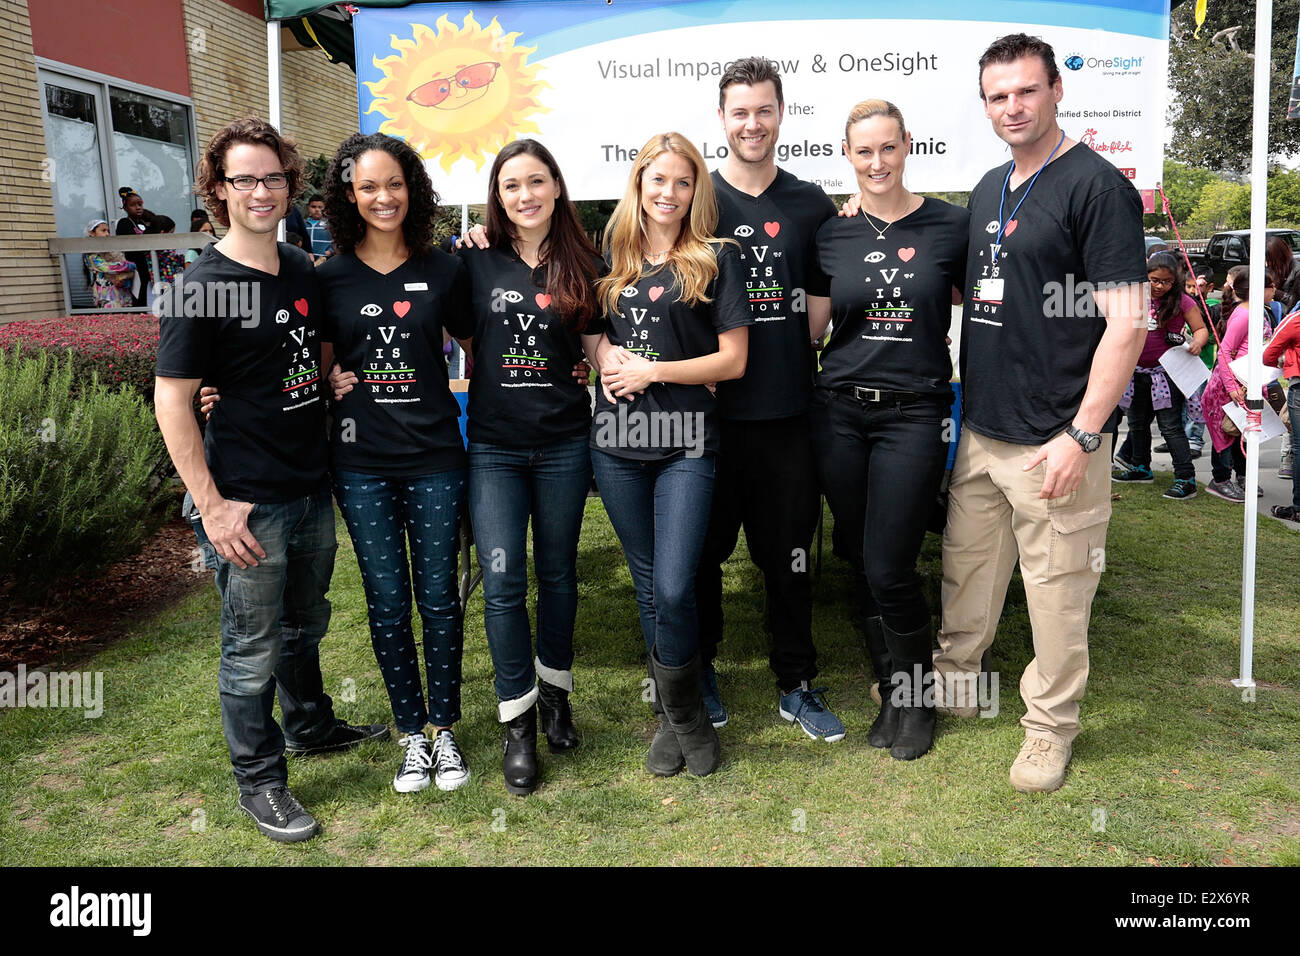 Visual Impact Now with Starz 'Spartacus: War of the Damned' cast volunteer event at Visual Impact Now Eye Clinic  Featuring: Andrew Lees,Cynthia Addai-Robinson,Jenna Lind,Ellen Hollman,Daniel Feuerriegel,Vanessa Cater,Stephen Dunlevy Where: Los Angeles, CA, United States When: 20 Mar 2013 Stock Photo